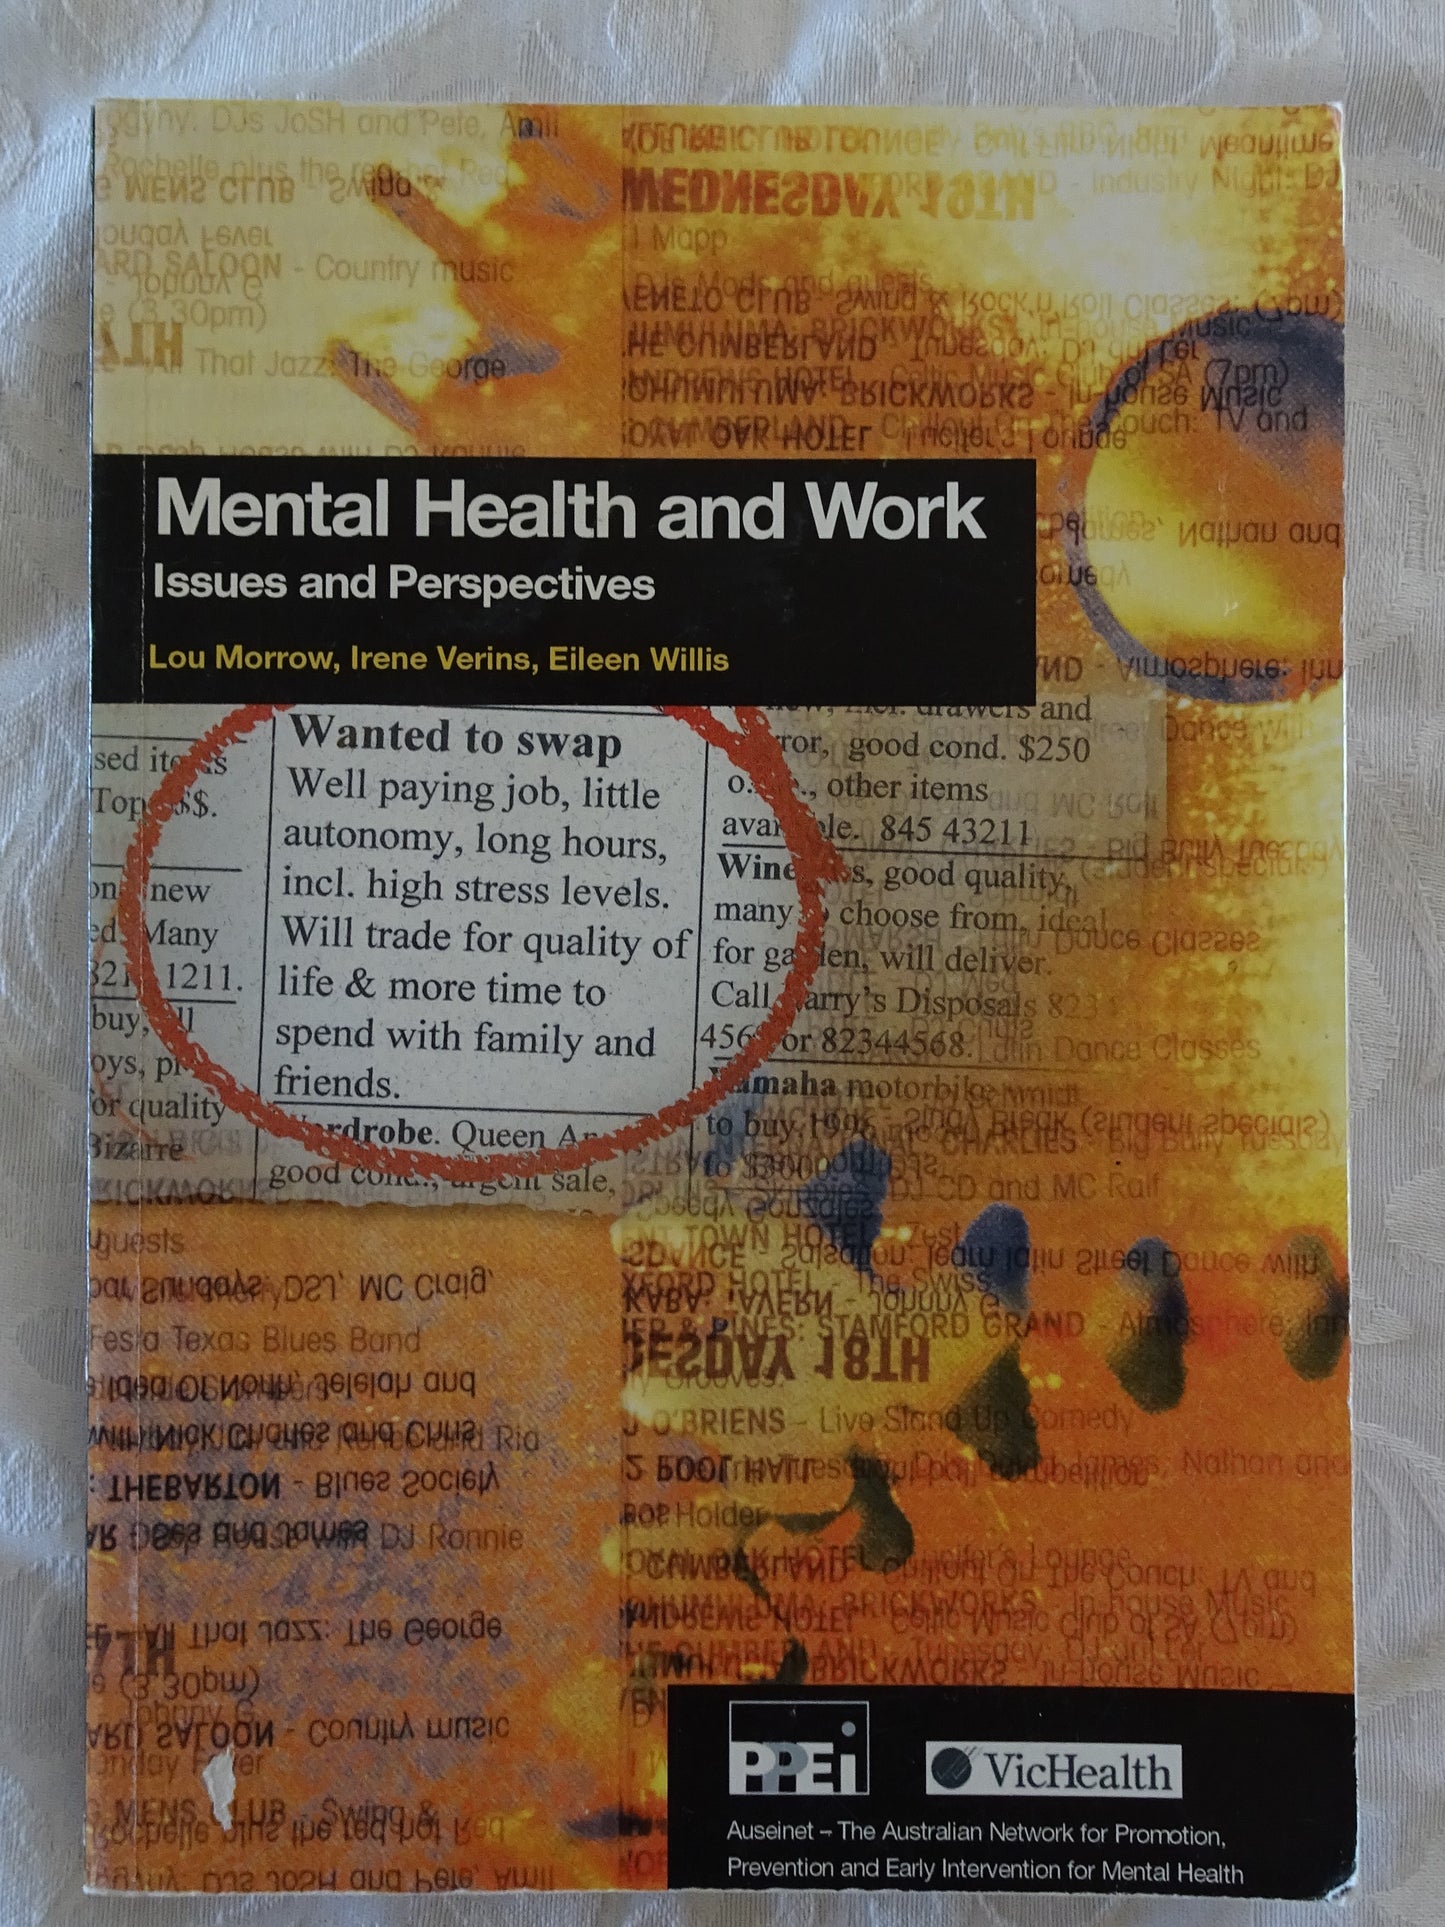 Mental Health and Work  Issues and Perspectives  Edited by Lou Morrow, Irene Verins, Eileen Willis